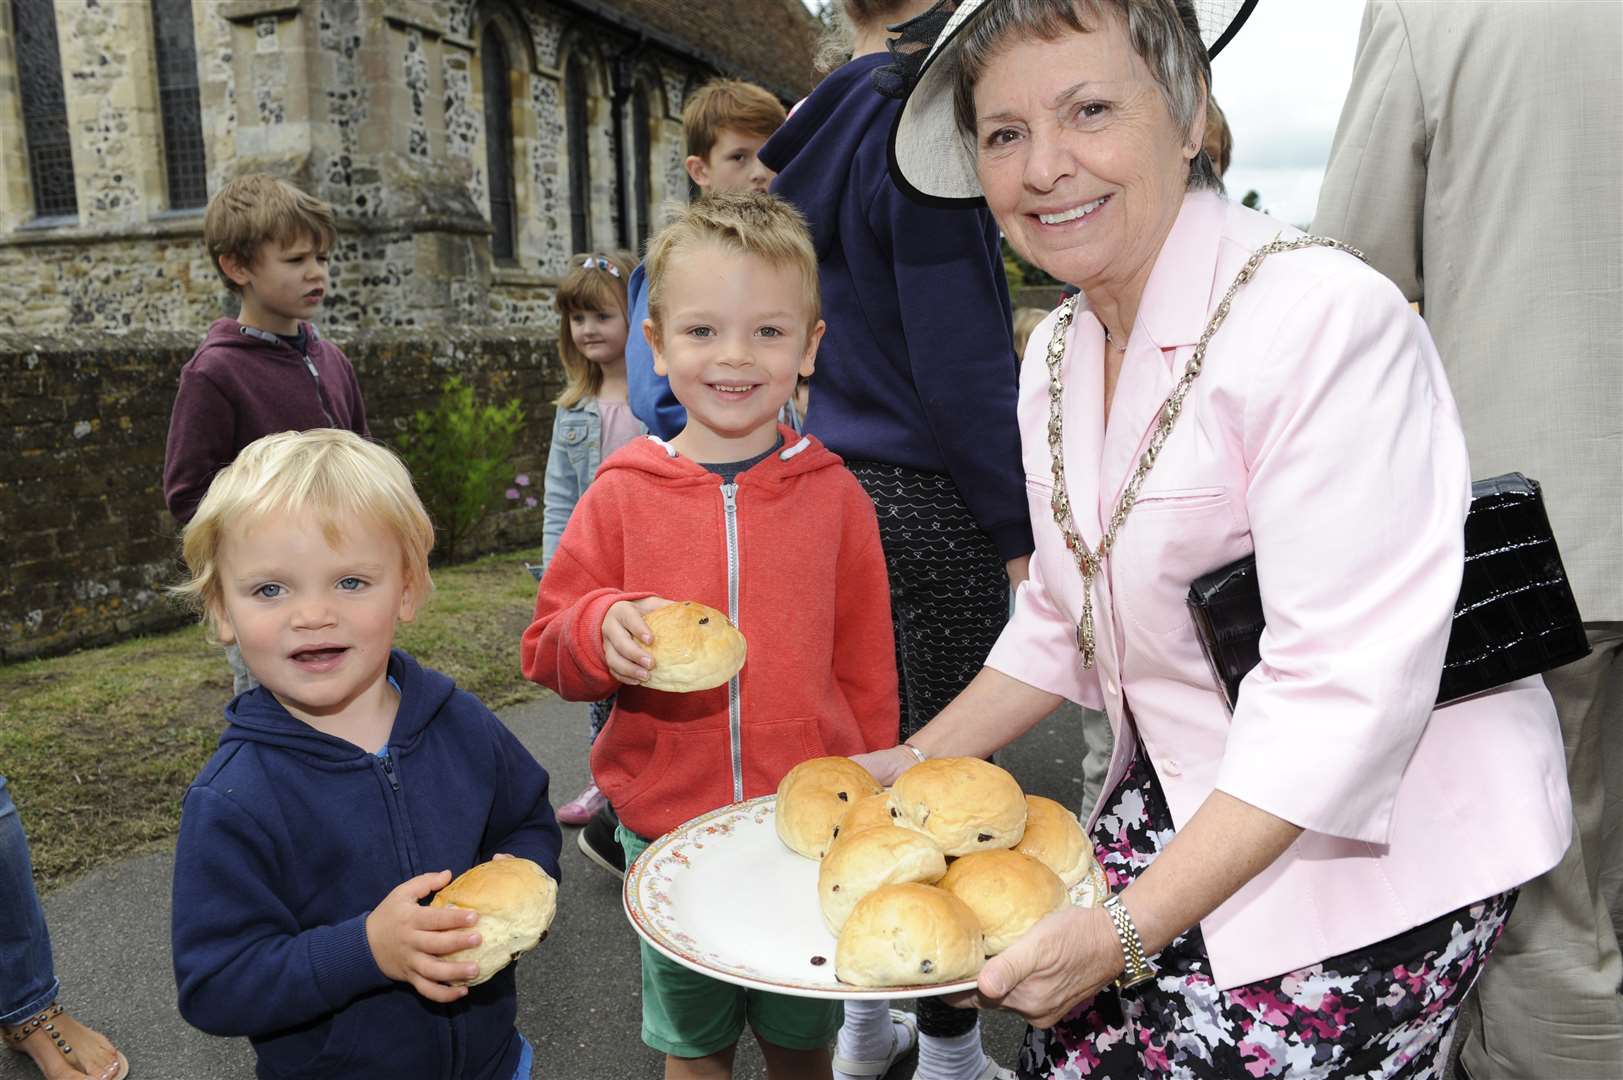 Mayoress Sue Graeme hands outs buns to Sac Lovett aged two and Luca Lovett aged four